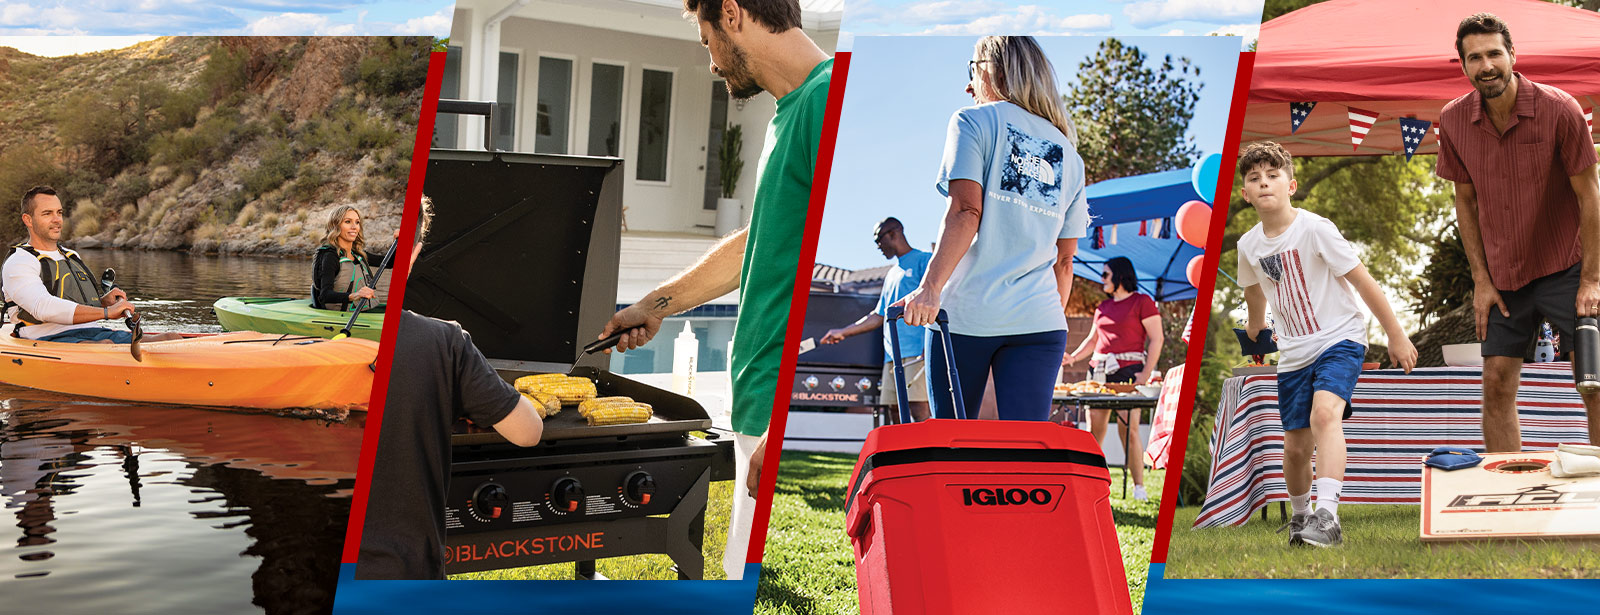 Kayaking, grilling and tailgating essentials on sale.